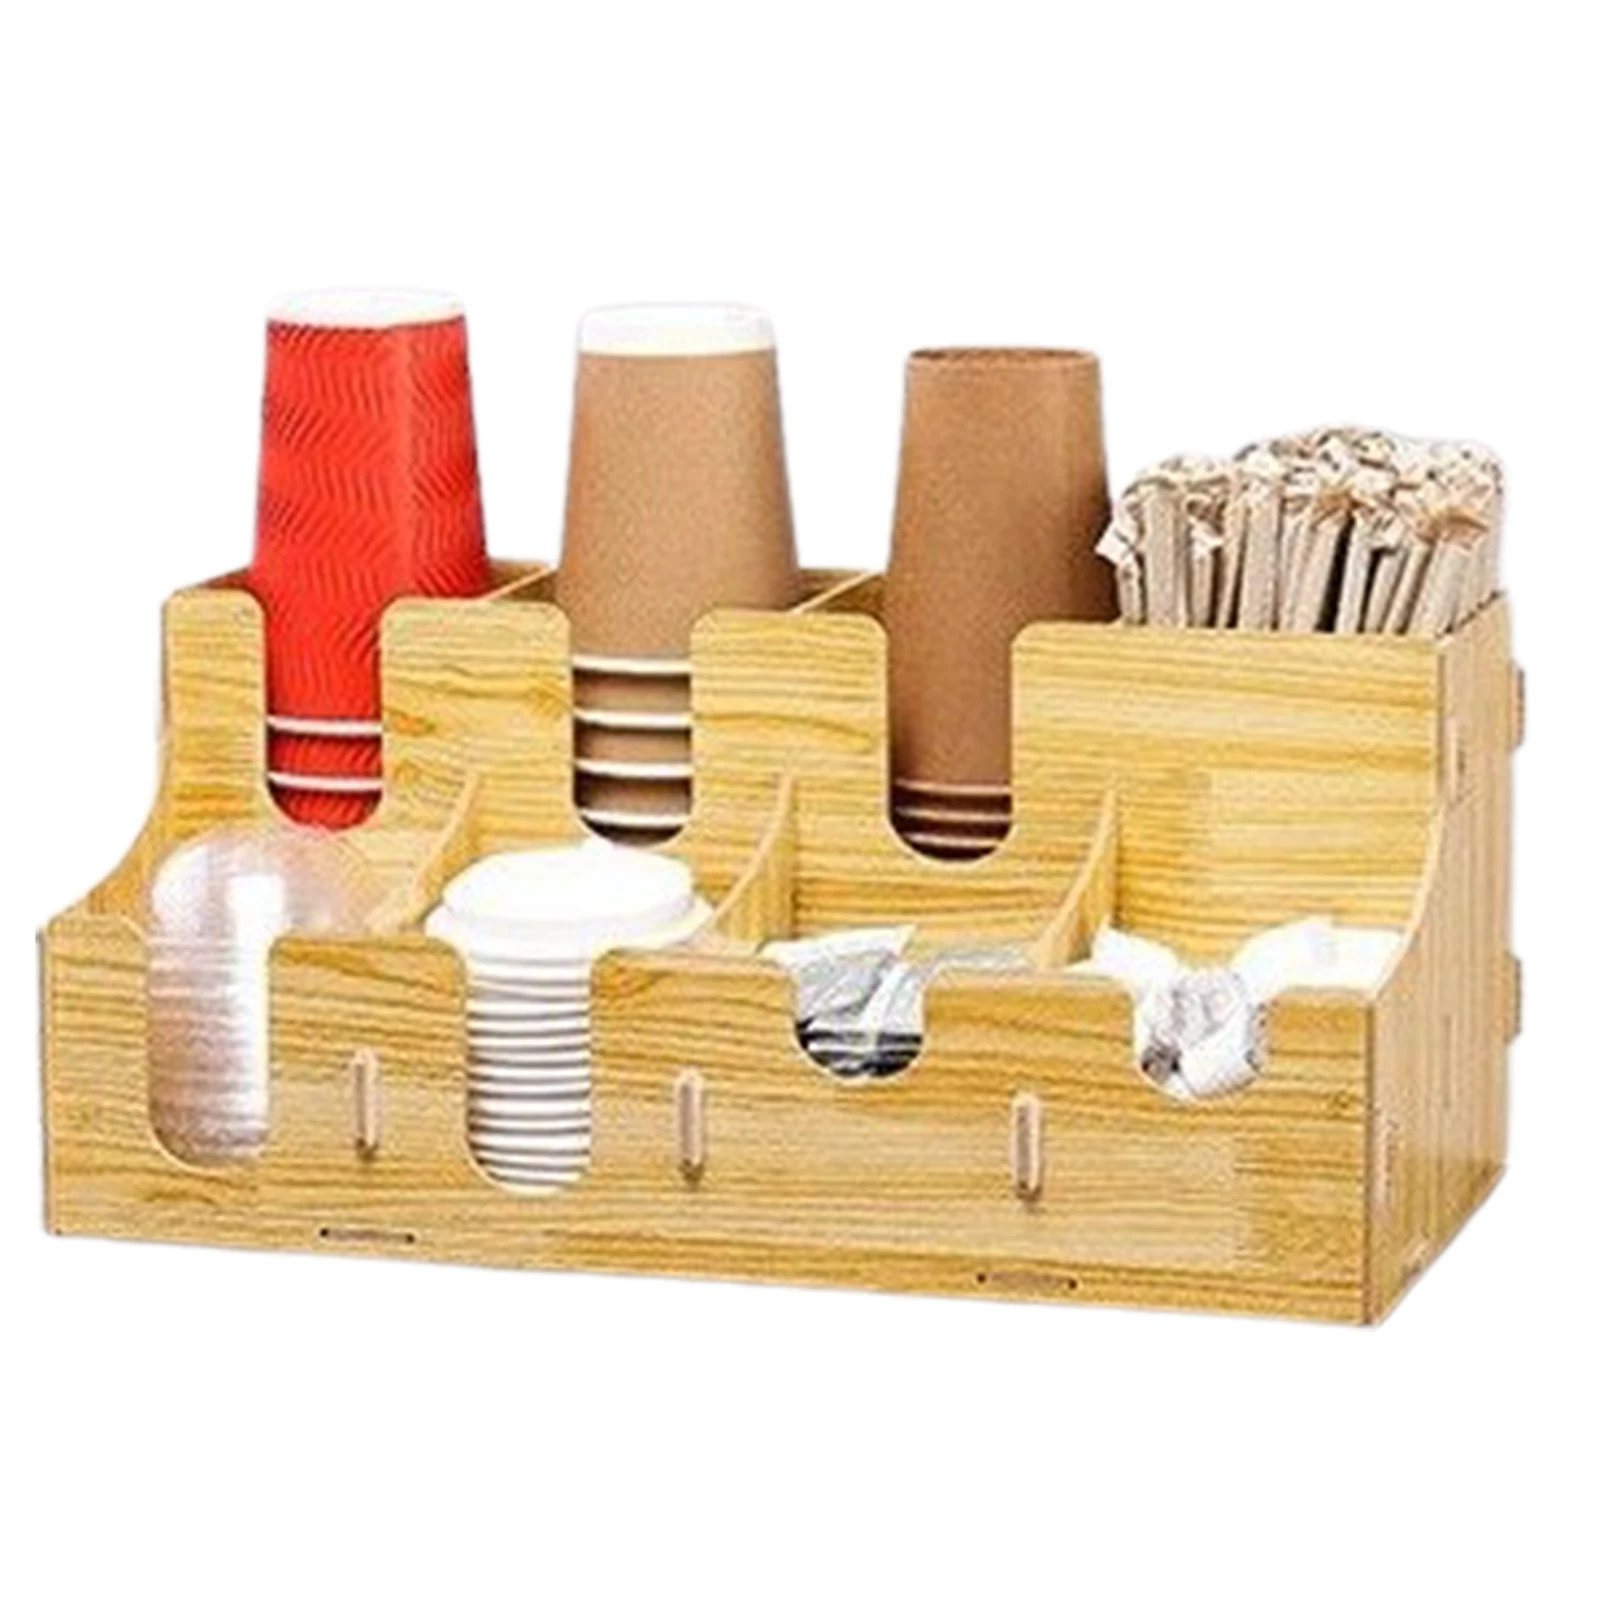 

Drink Storage Rack 8 Compartments Tabletop Breakroom Accessories Disposable Cup Holder Bar Display Condiment Organizer Shop